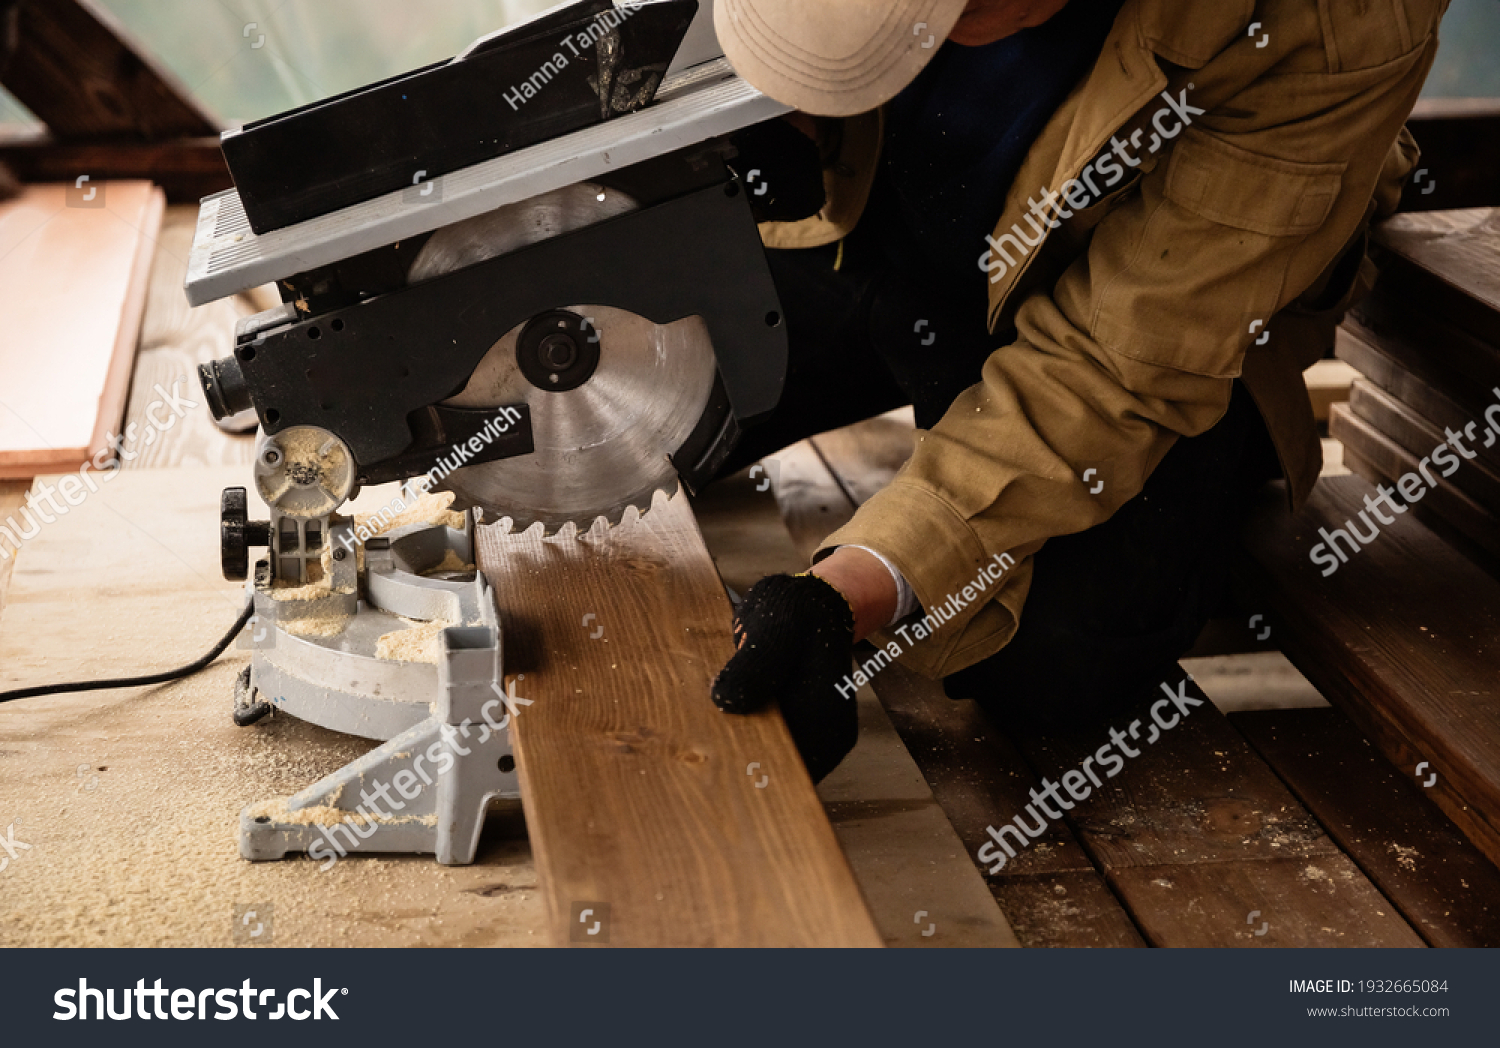 Miter saw with a large metal blade in the hands of a carpenter. Working tool for sawing wooden planks. A close-up of the sawing process. Labor protection and safety rules for the use of power tools. #1932665084